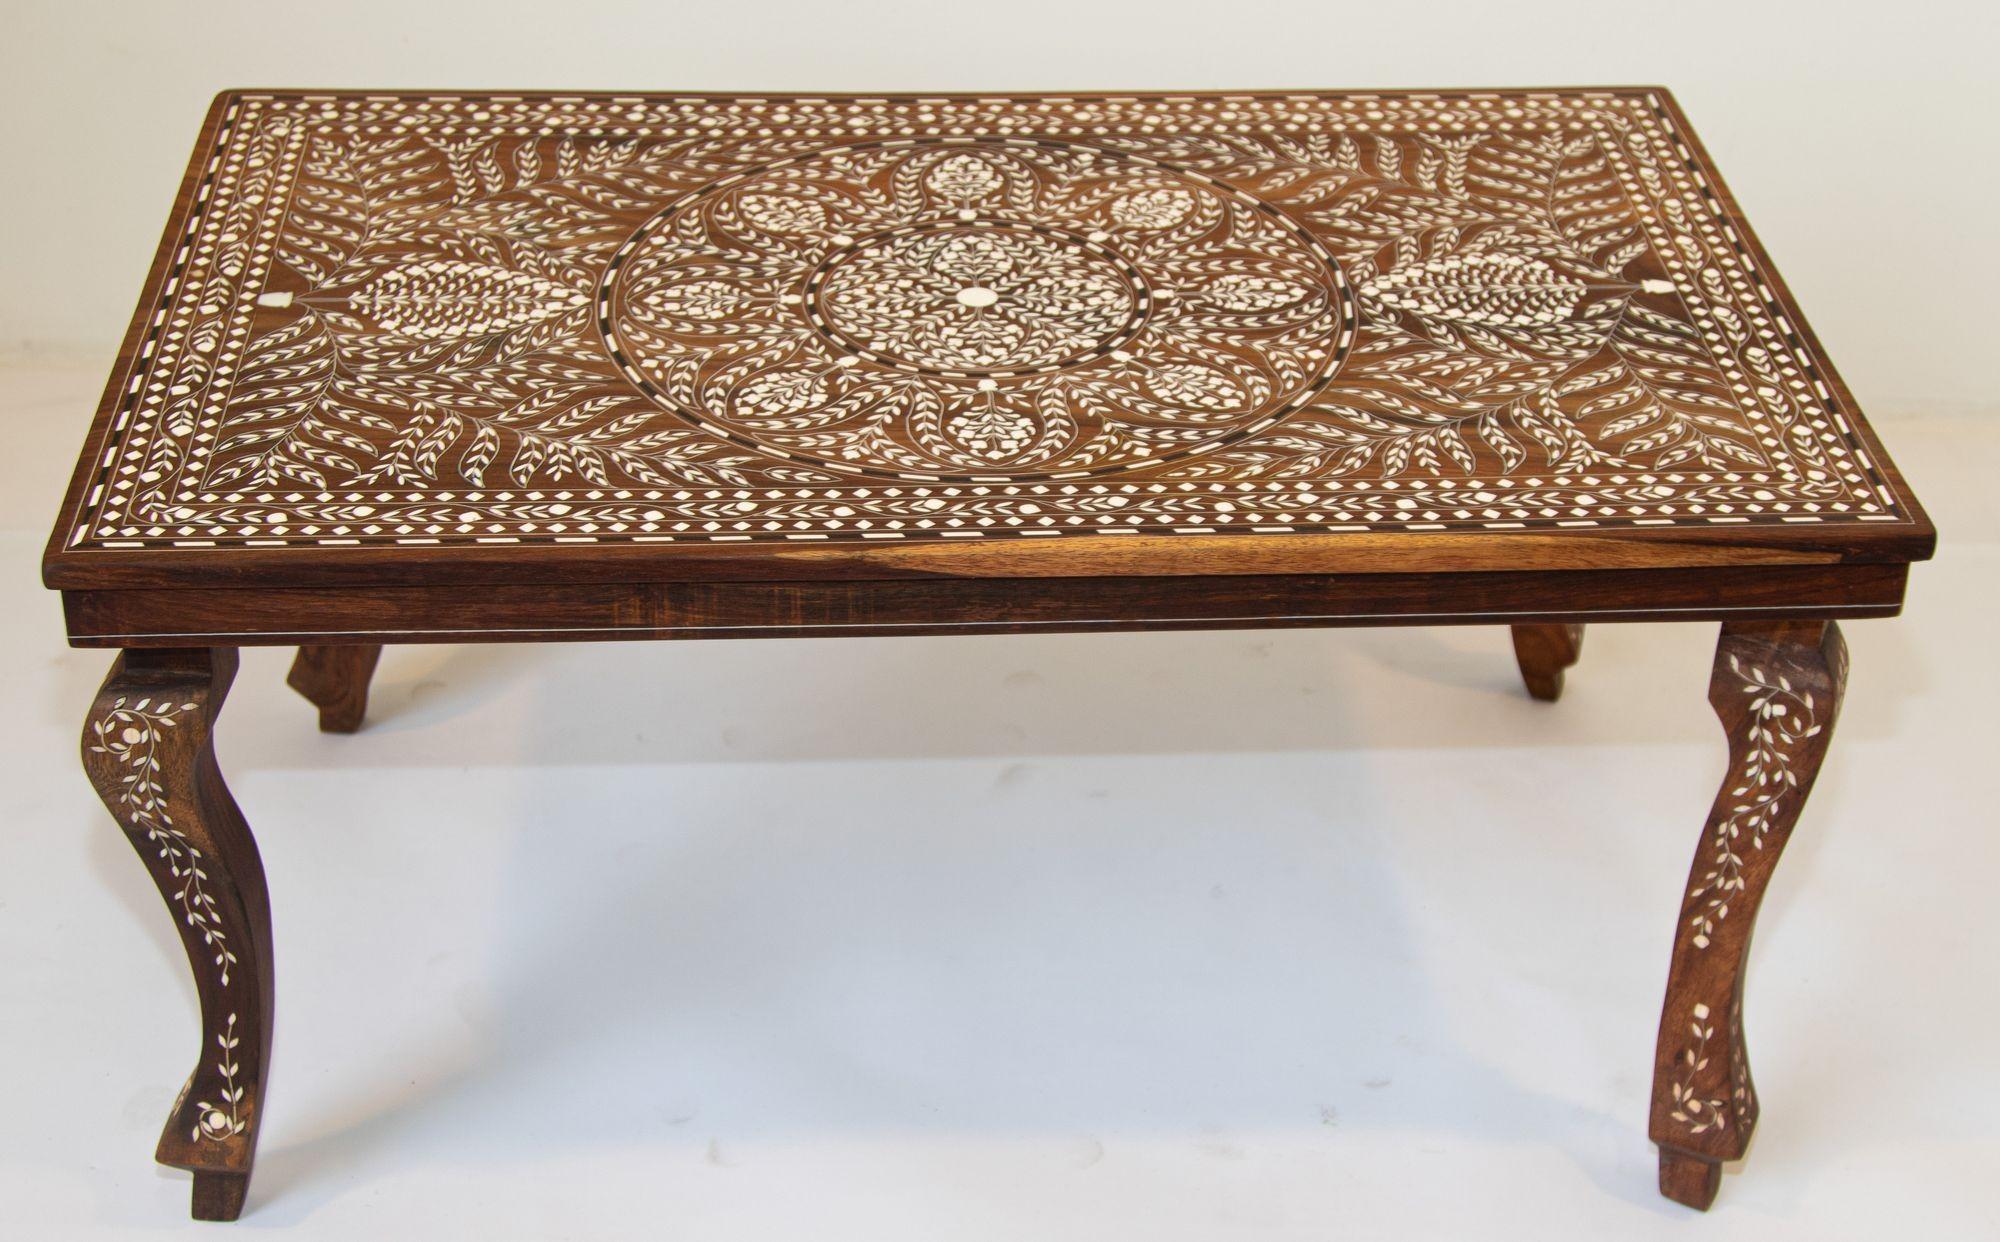 Anglo Indian rectangular coffee table heavily with bone inlay circa 1940's.
This beautiful Mughal Raj table features a top with spectacular foliage hand inlay stylized floral medallion surrounded foliate Moorish designs with a warm brown walnut